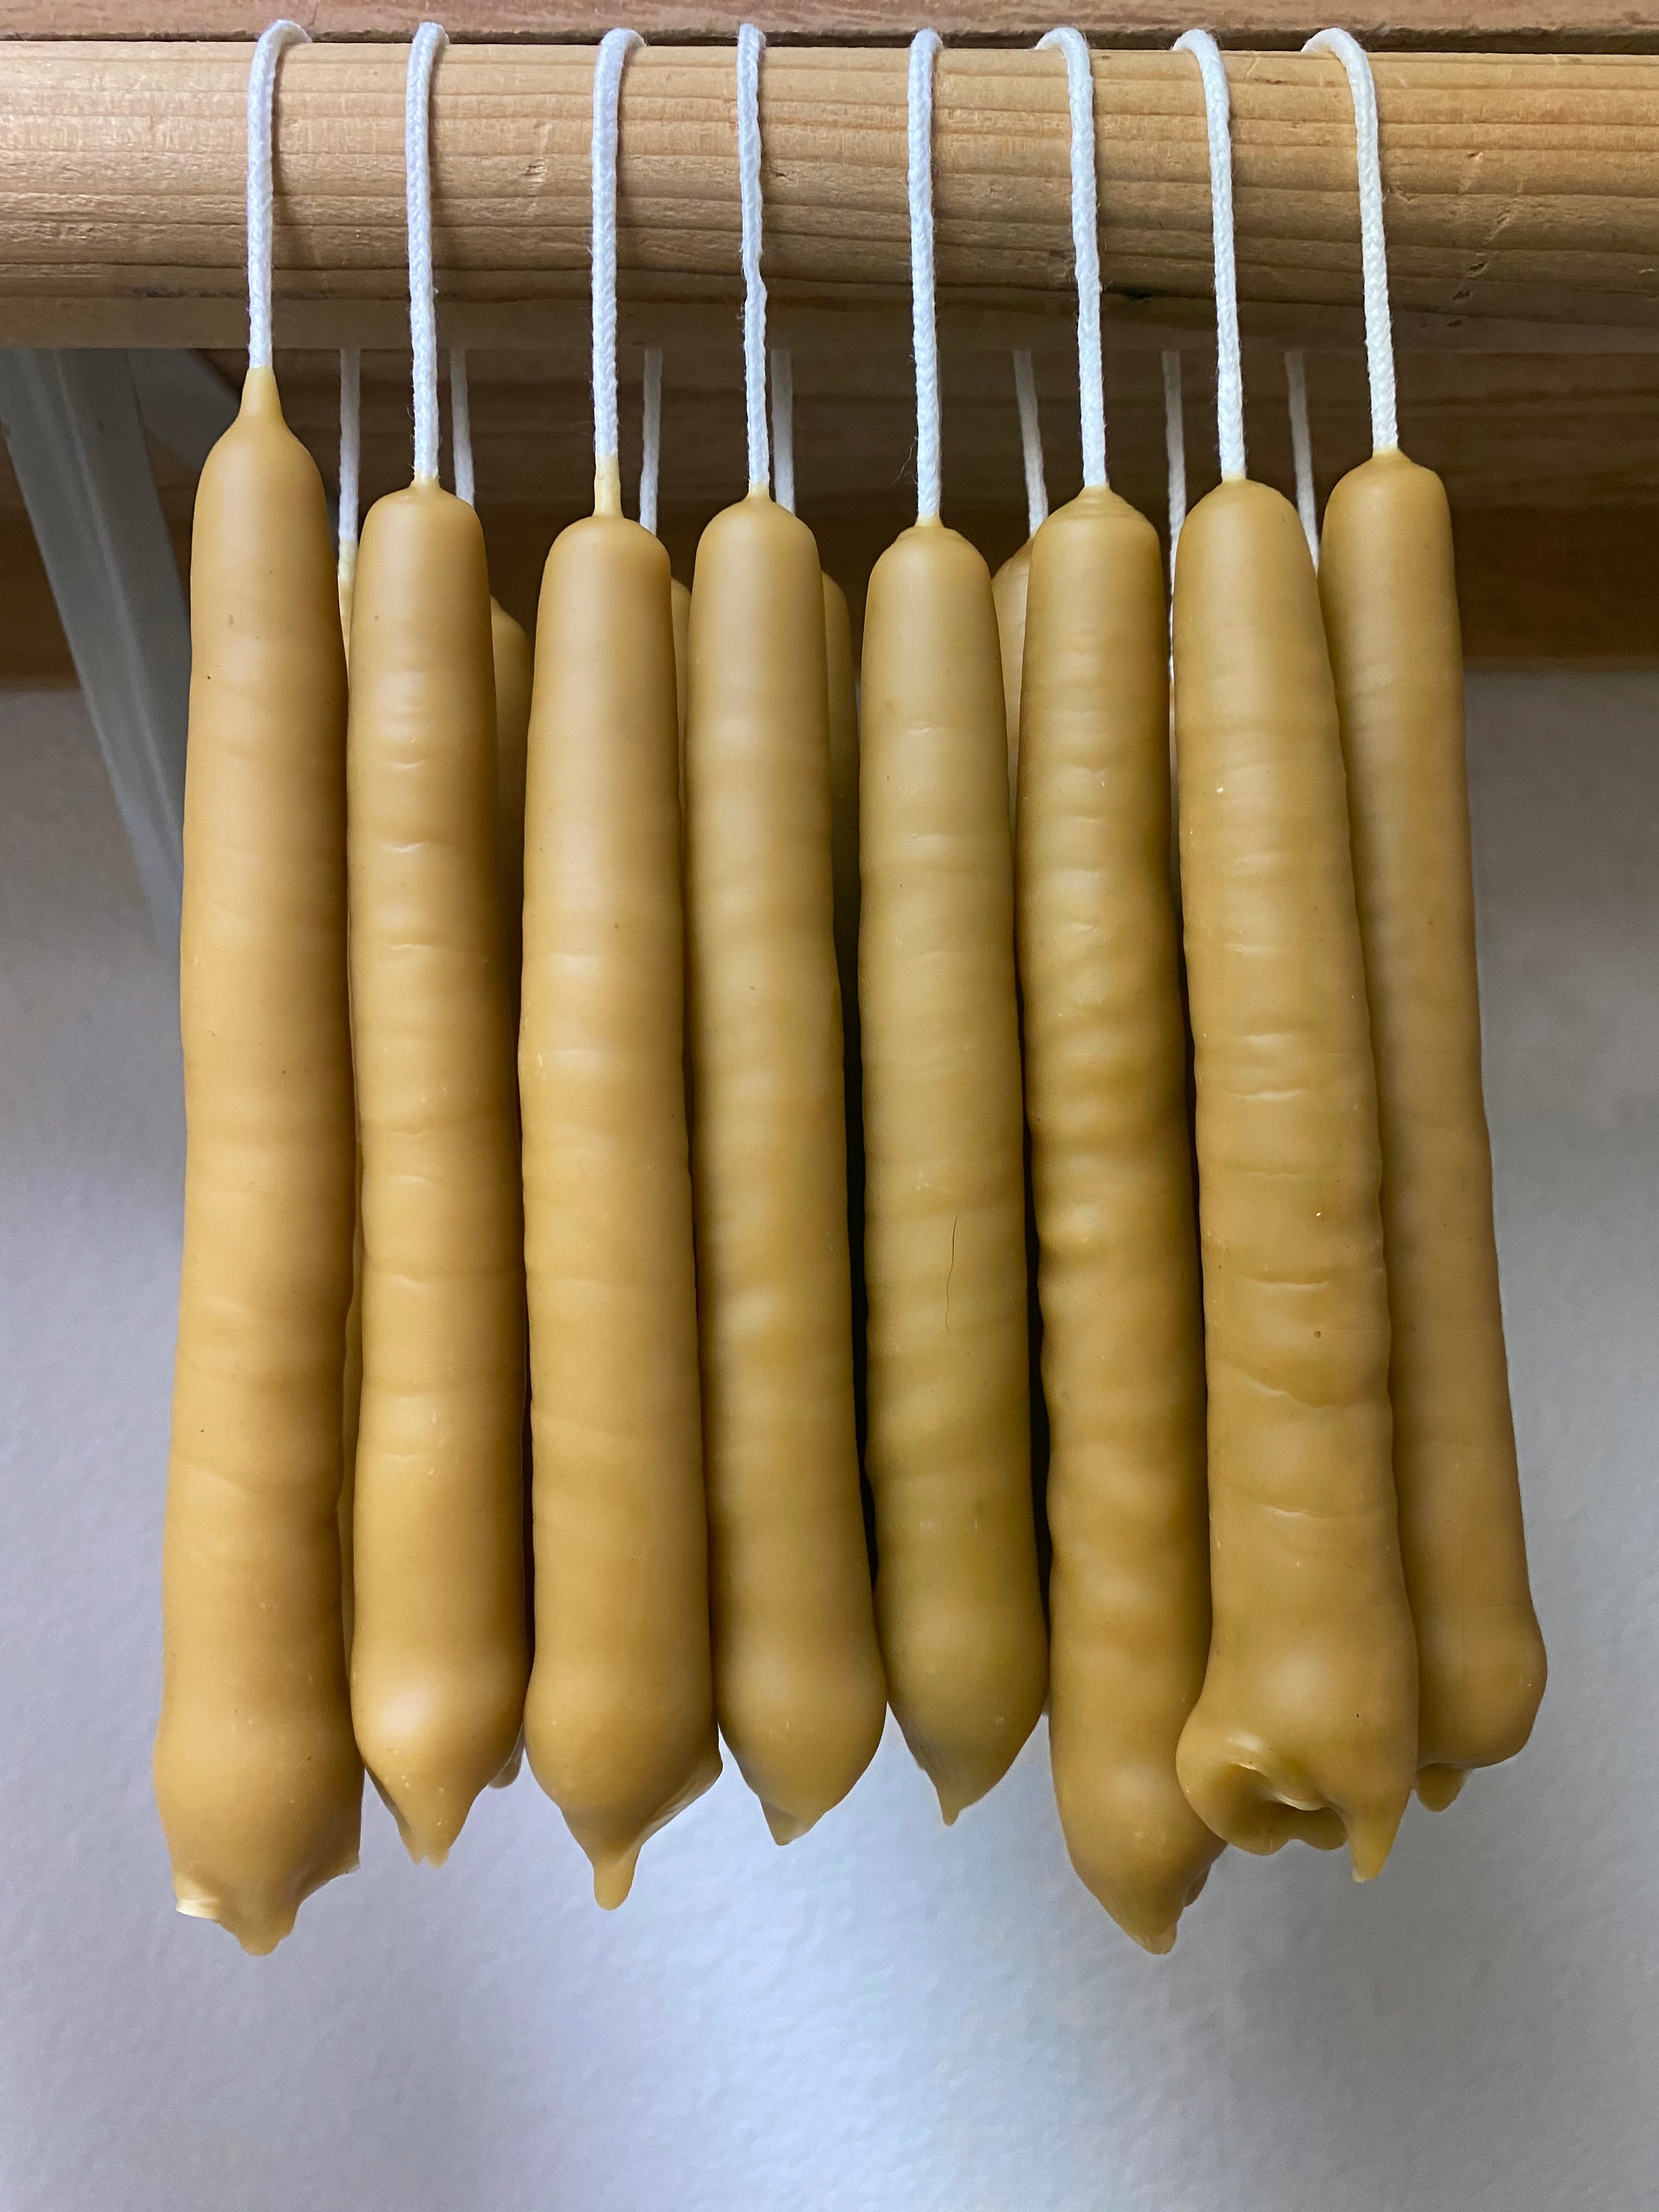 Homemade Dipped Beeswax Candles